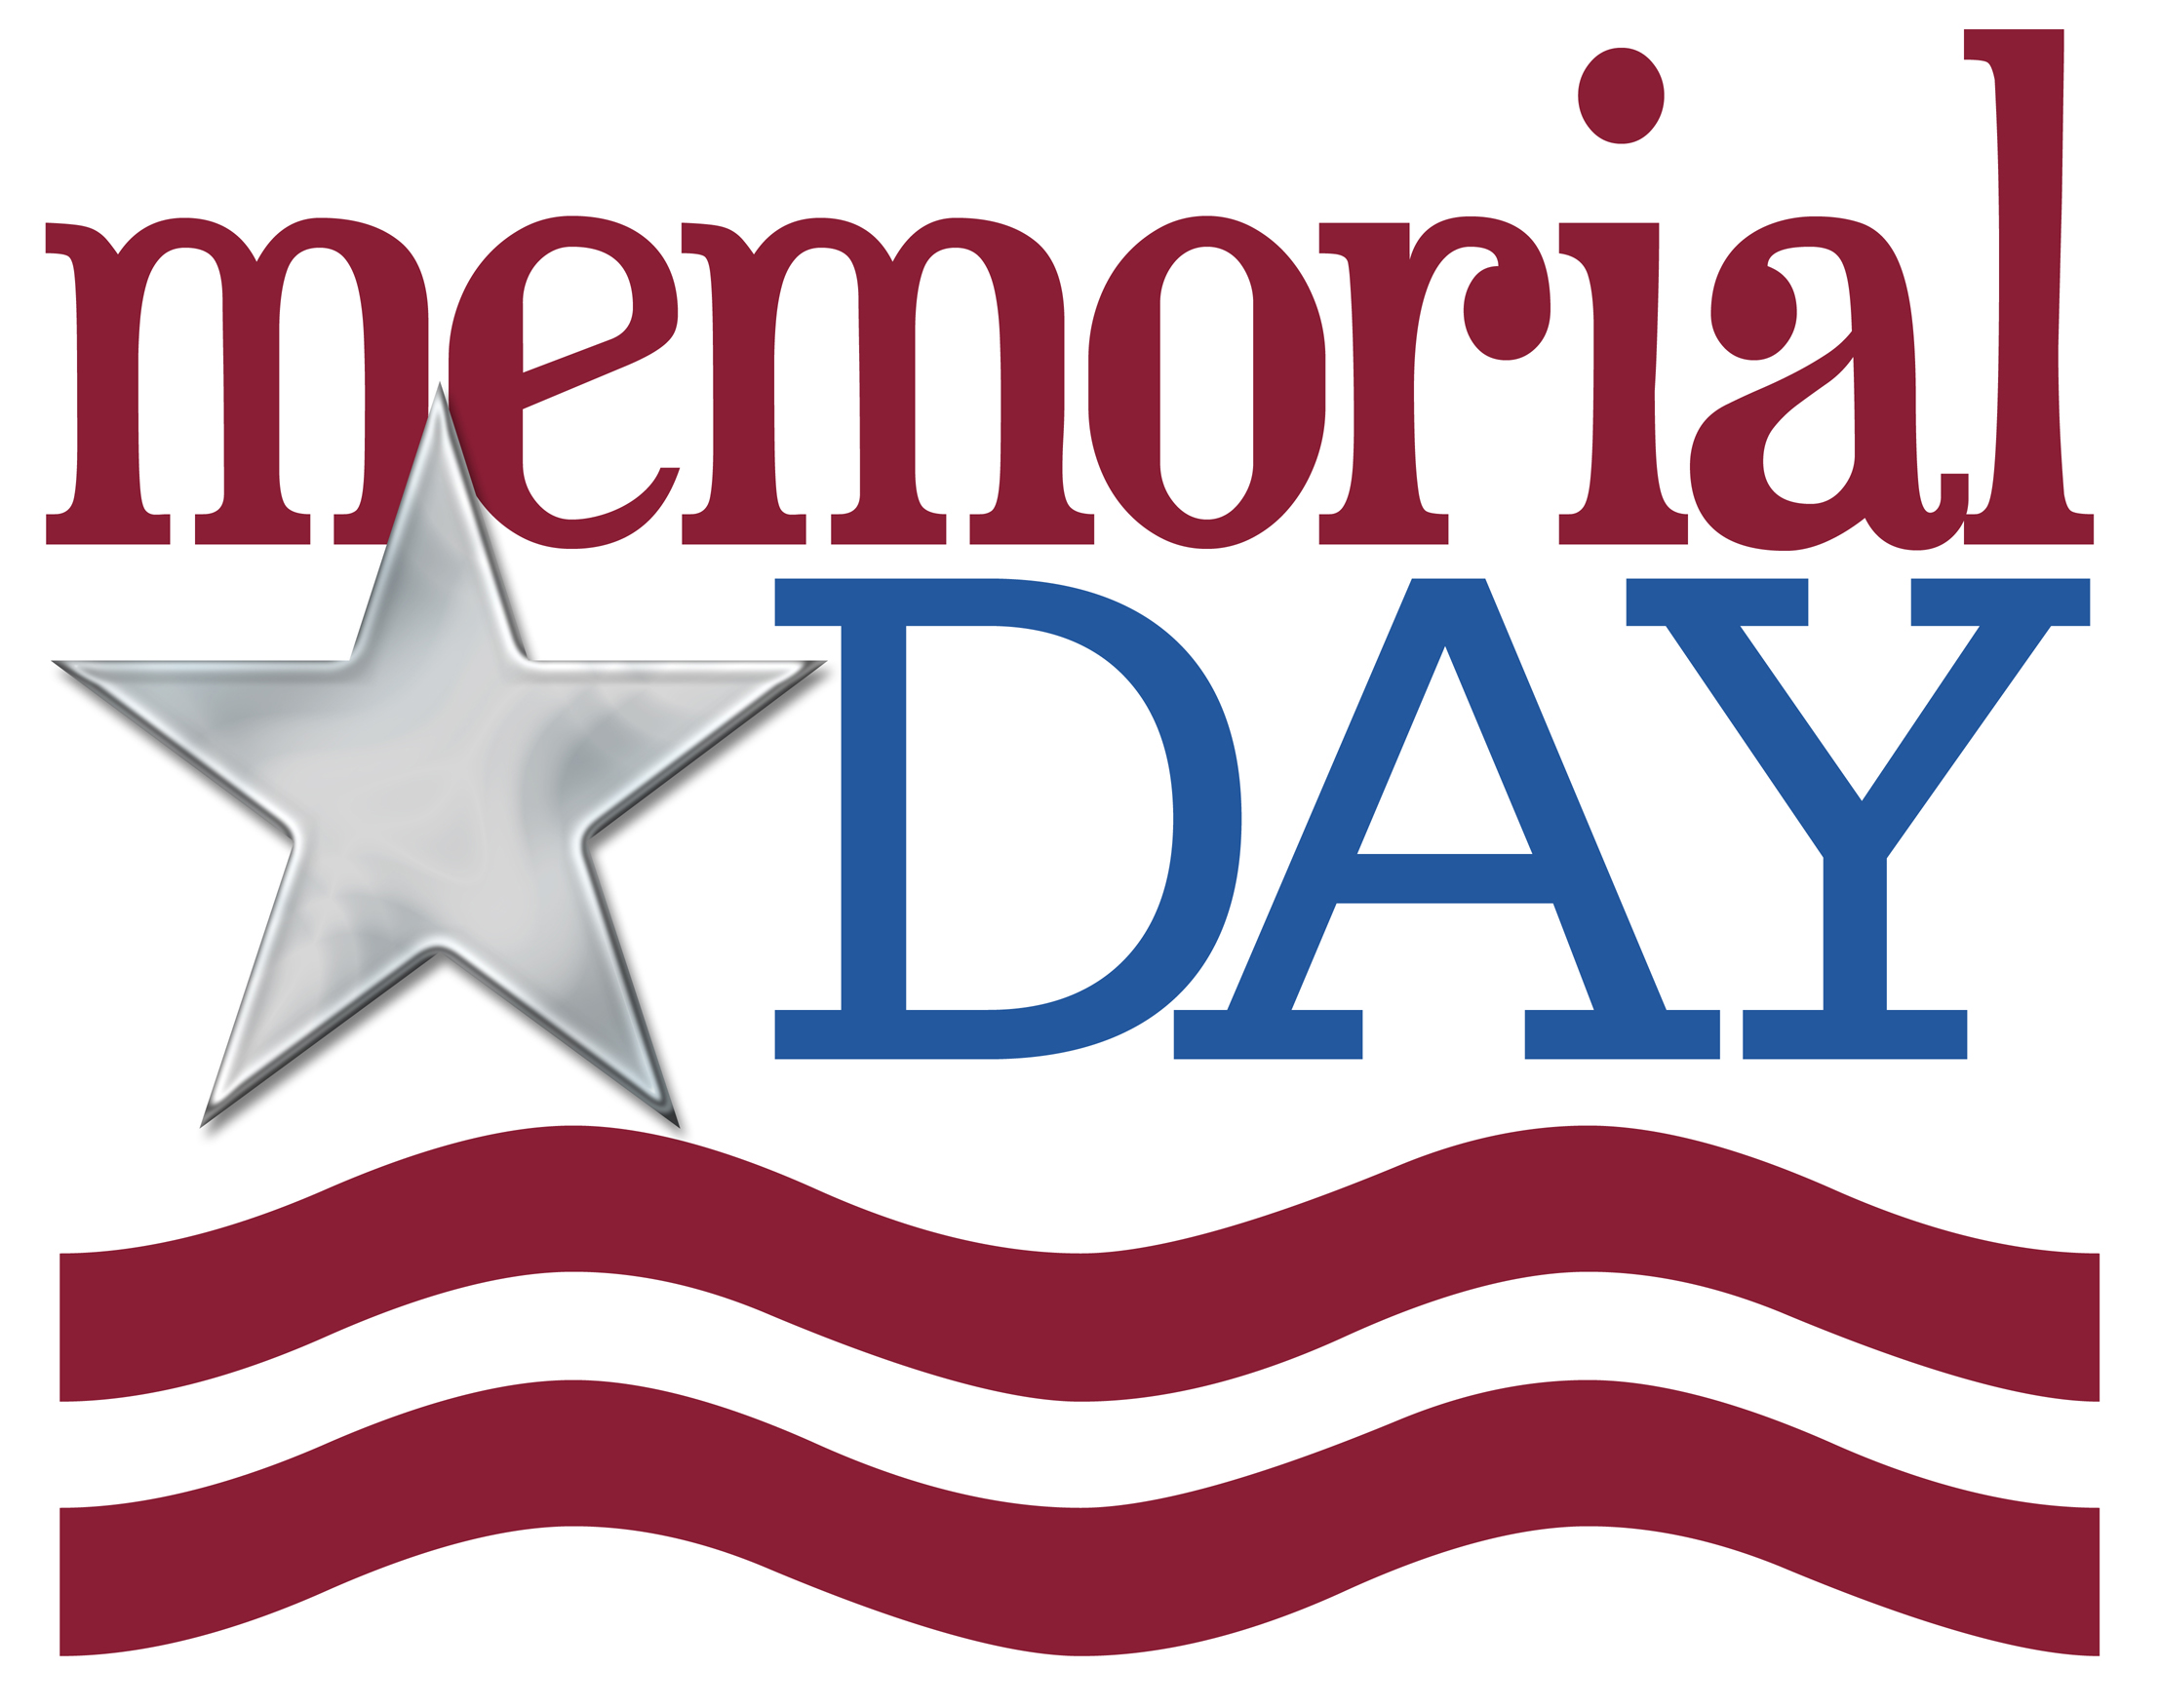 happy memorial day clipart - Memorial Day Clipart